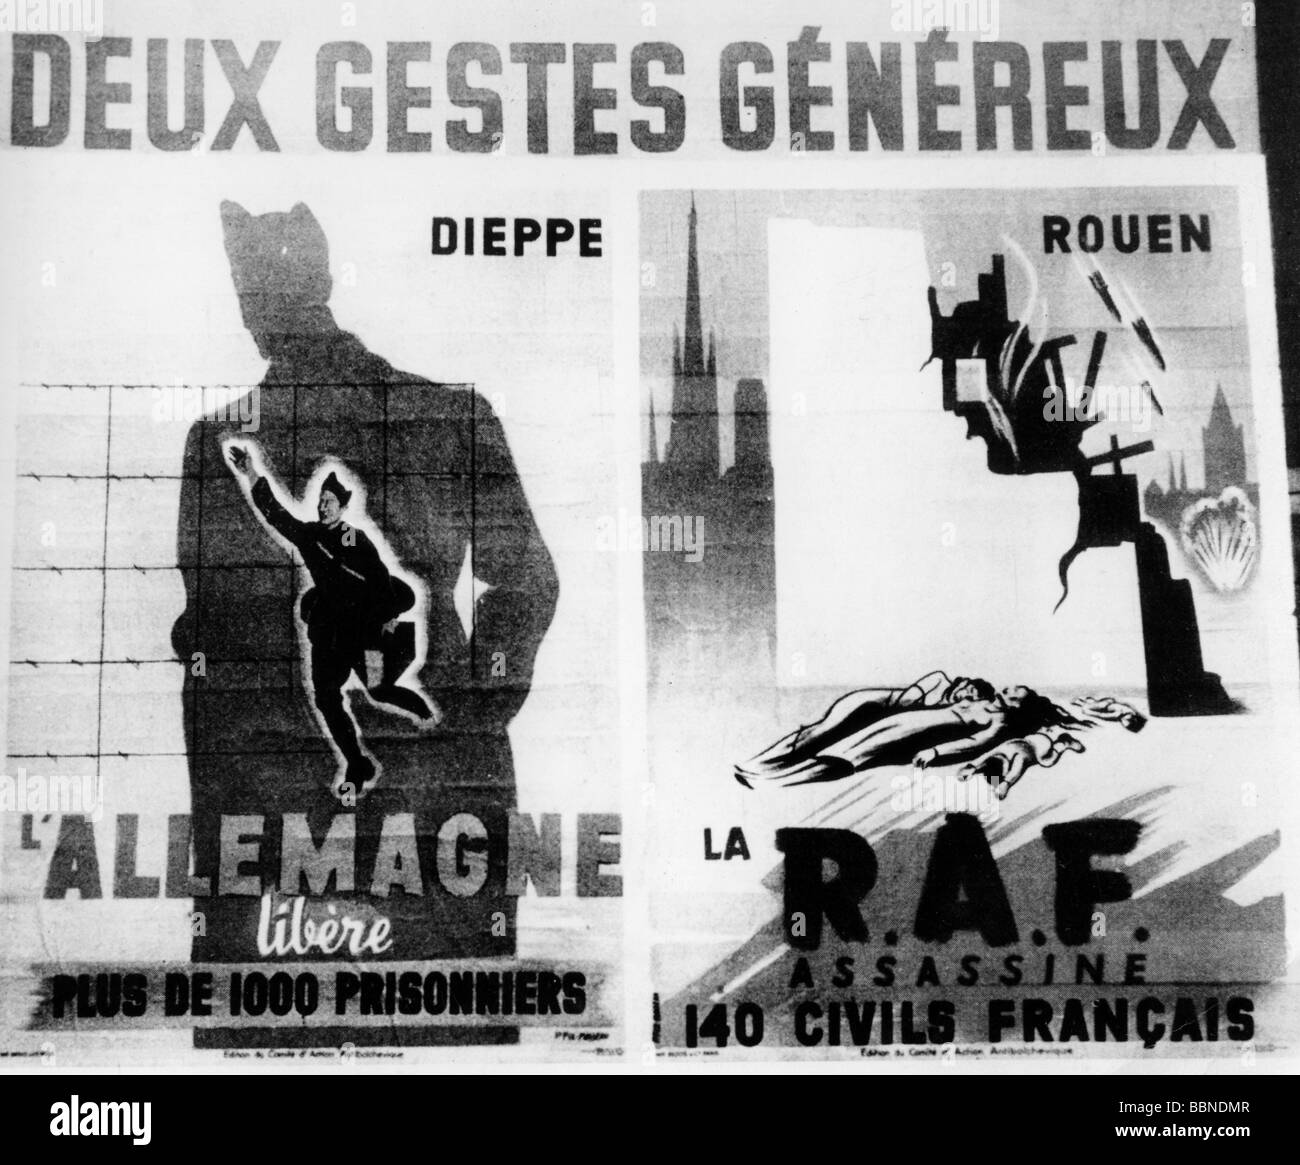 events, Second World War / WWII, propaganda, poster for the occupied France, 'Deux gestes genereux' (Two generous gestures), Germany, second half 1942, Stock Photo